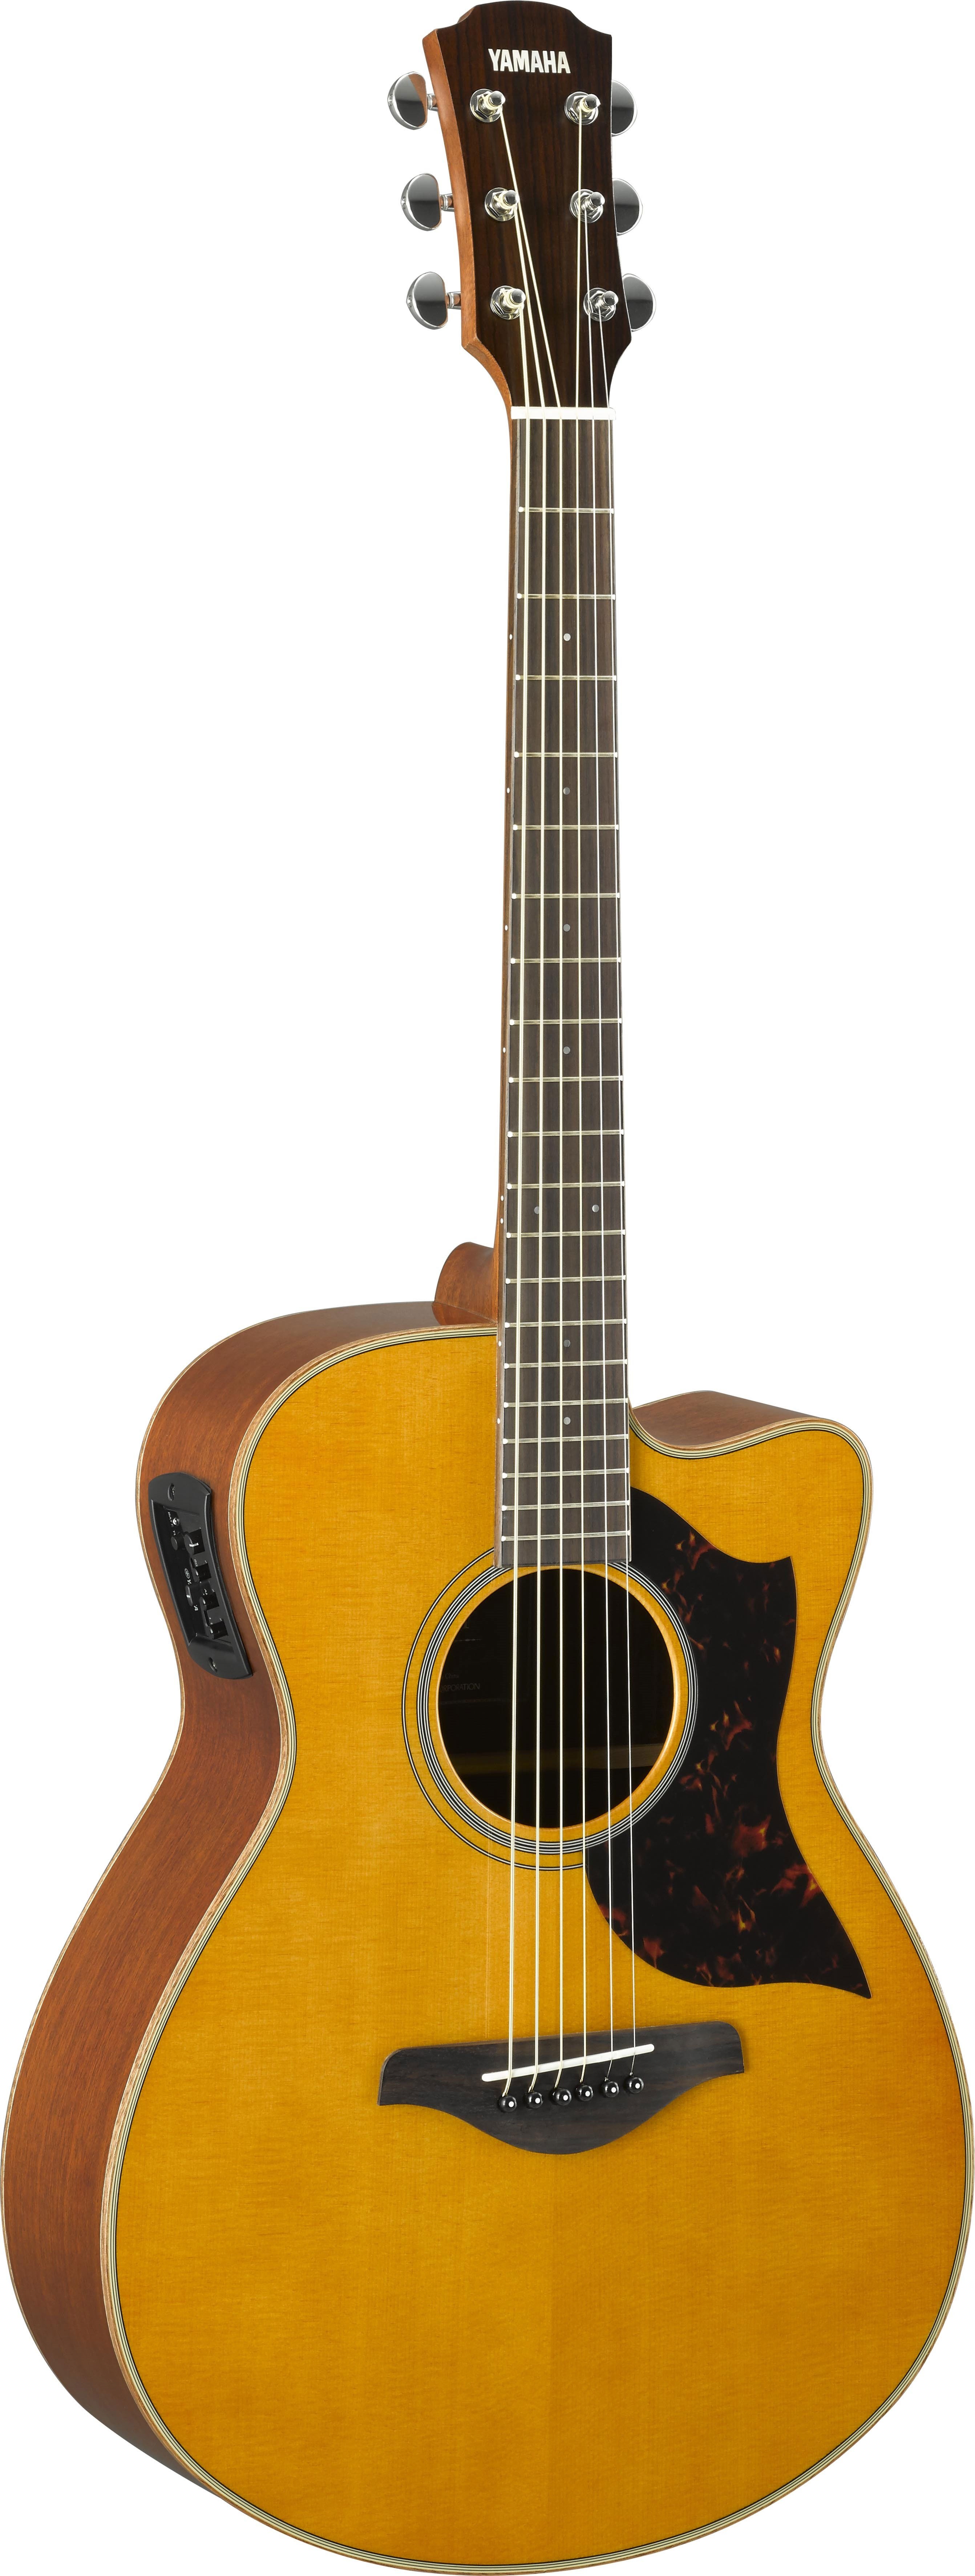 Yamaha AC1M Concert Cutaway - Natural Acoustic-Electric Guitar, Sitka Spruce Top, Mahogany Back and Sides for sale